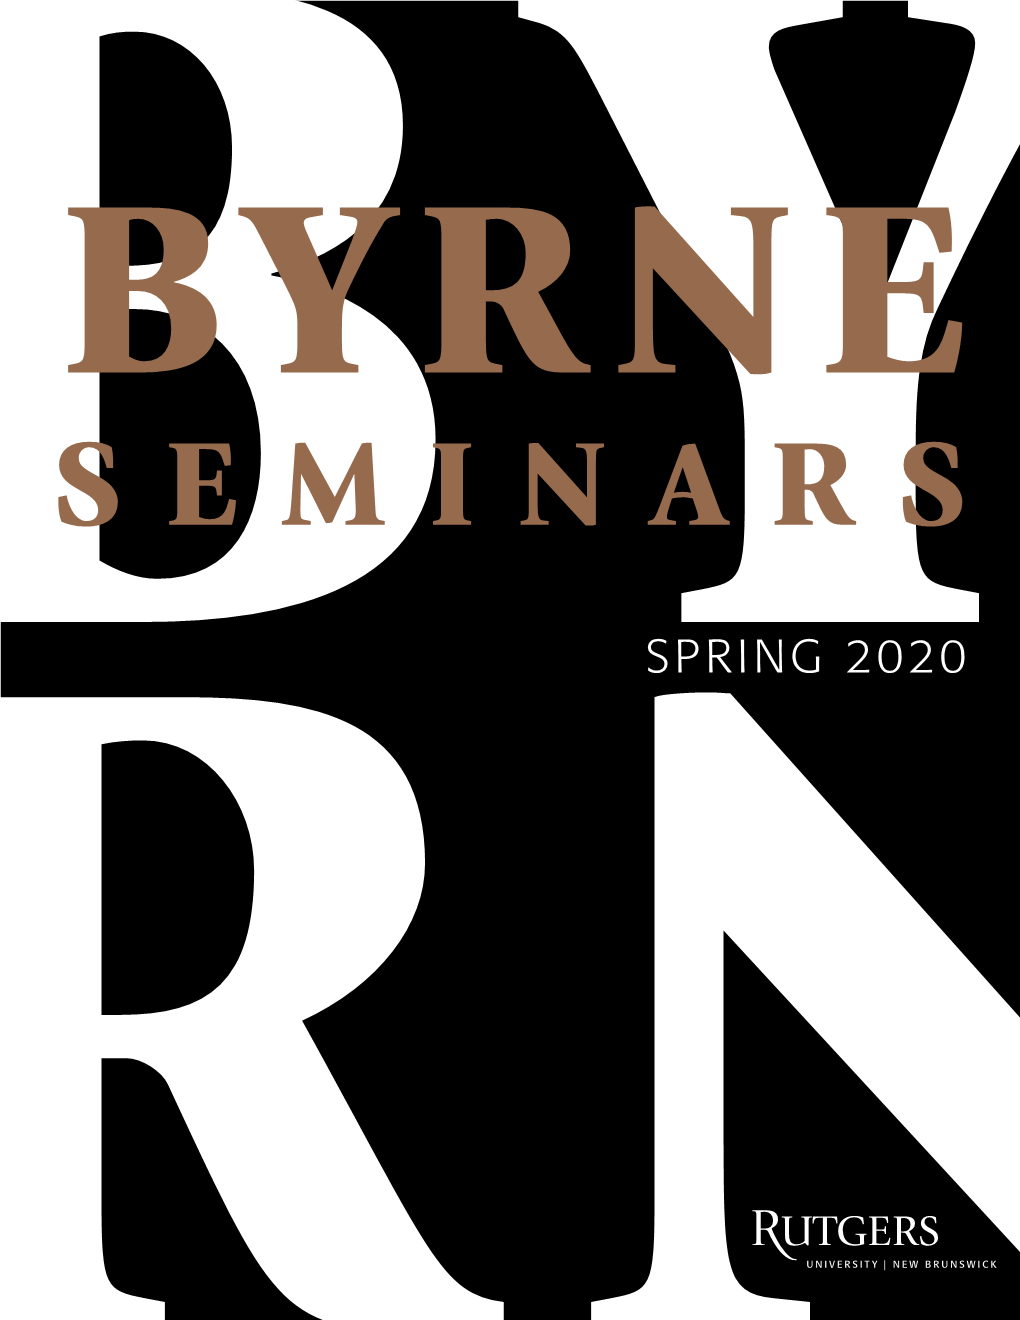 SPRING 2020 WHAT ARE BYRNE SEMINARS? Byrne Seminars Are Small, One-Credit Courses, Limited to 20 Students